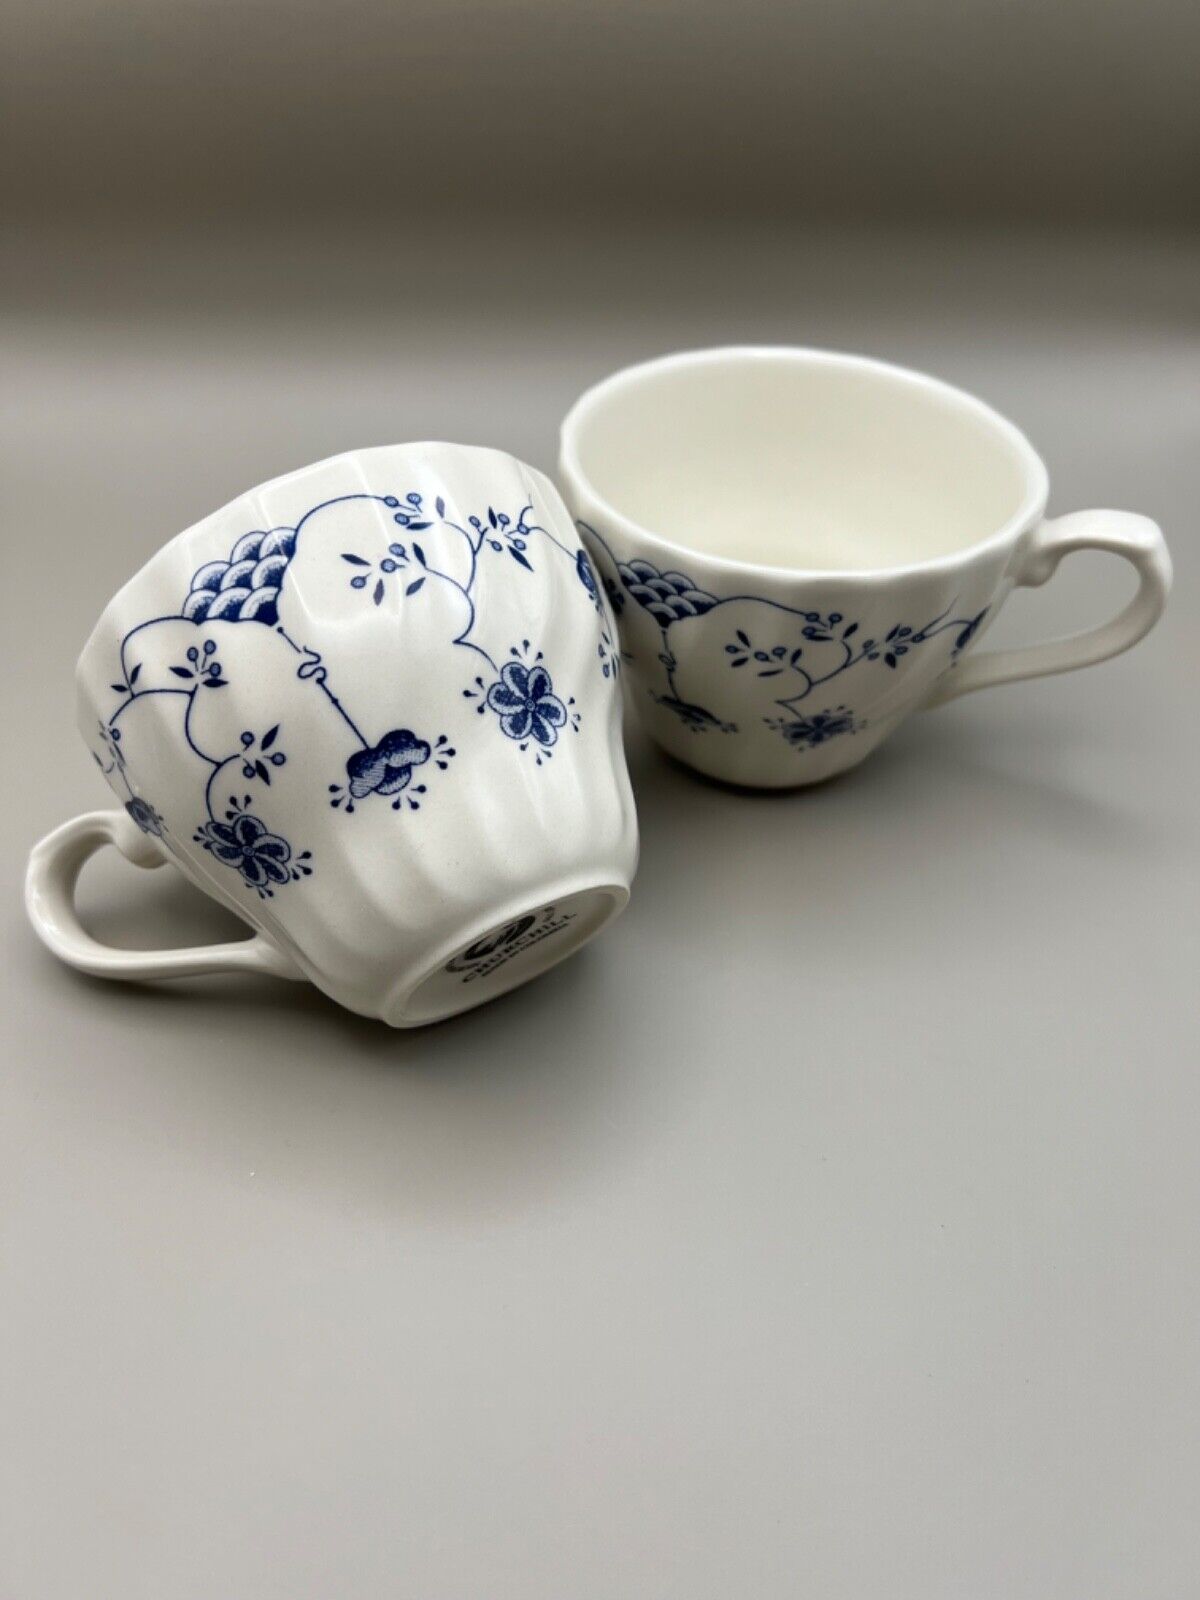 Set of 2 Churchill Tea Cups - White and Blue   Good Condition